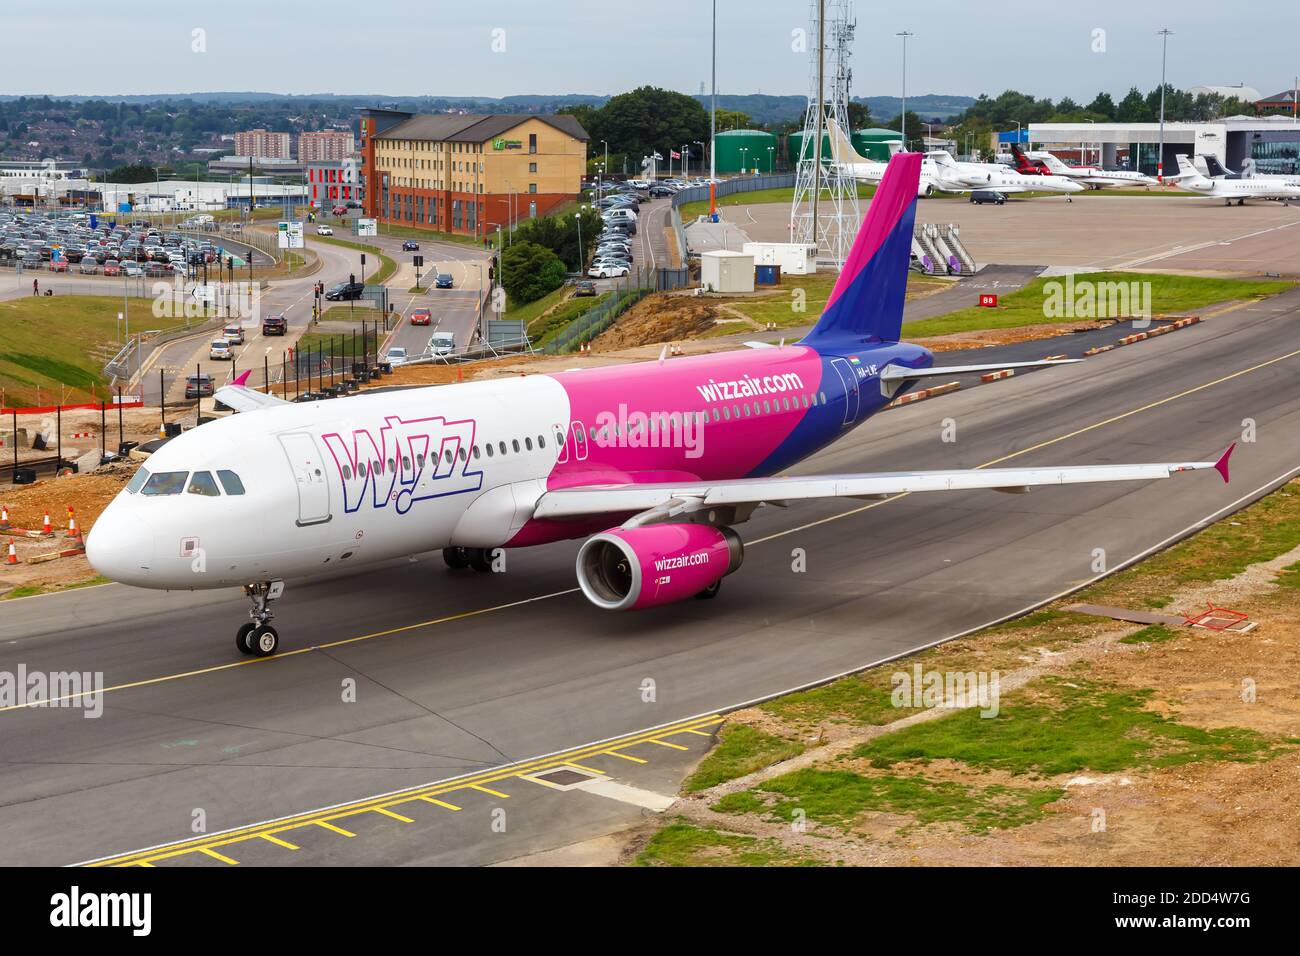 Luton, United Kingdom - July 9, 2019: Wizzair Airbus A320 airplane at London Luton Airport in the United Kingdom. Airbus is a European aircraft manufa Stock Photo